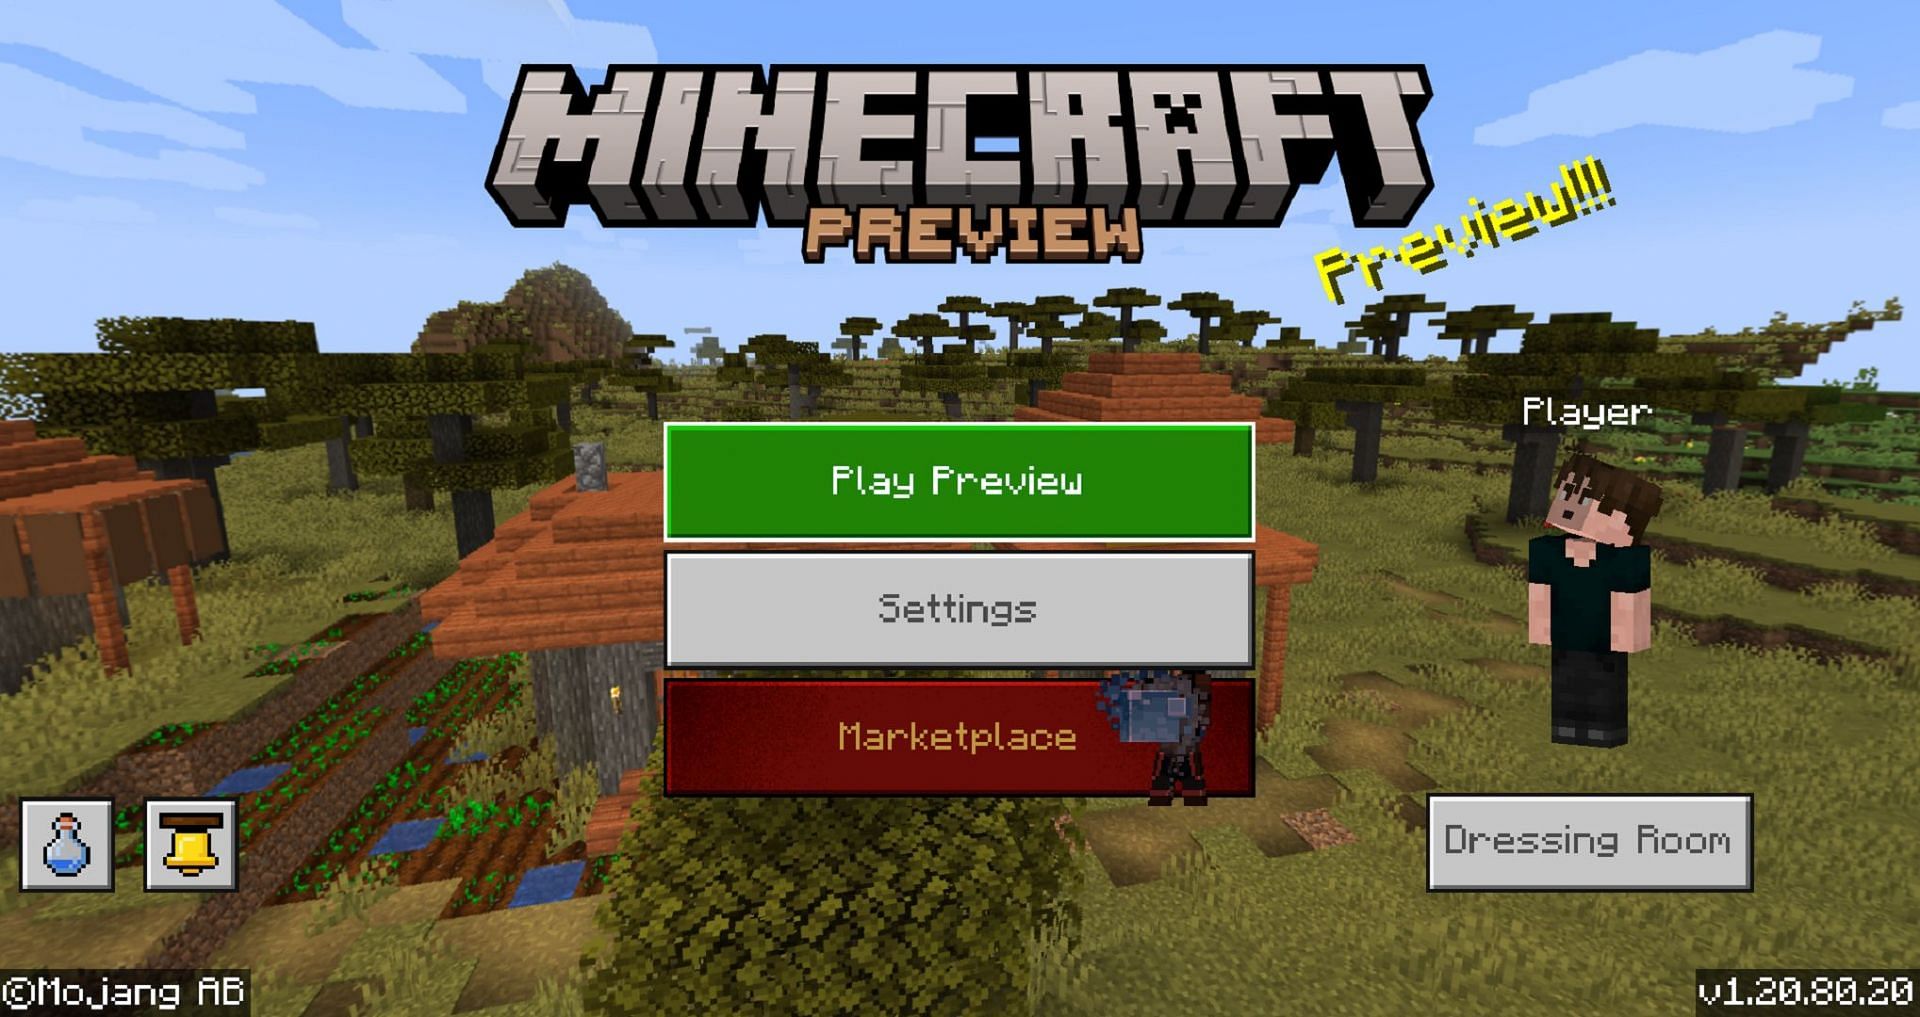 How to download Minecraft Bedrock 1.20.80.20 beta and preview